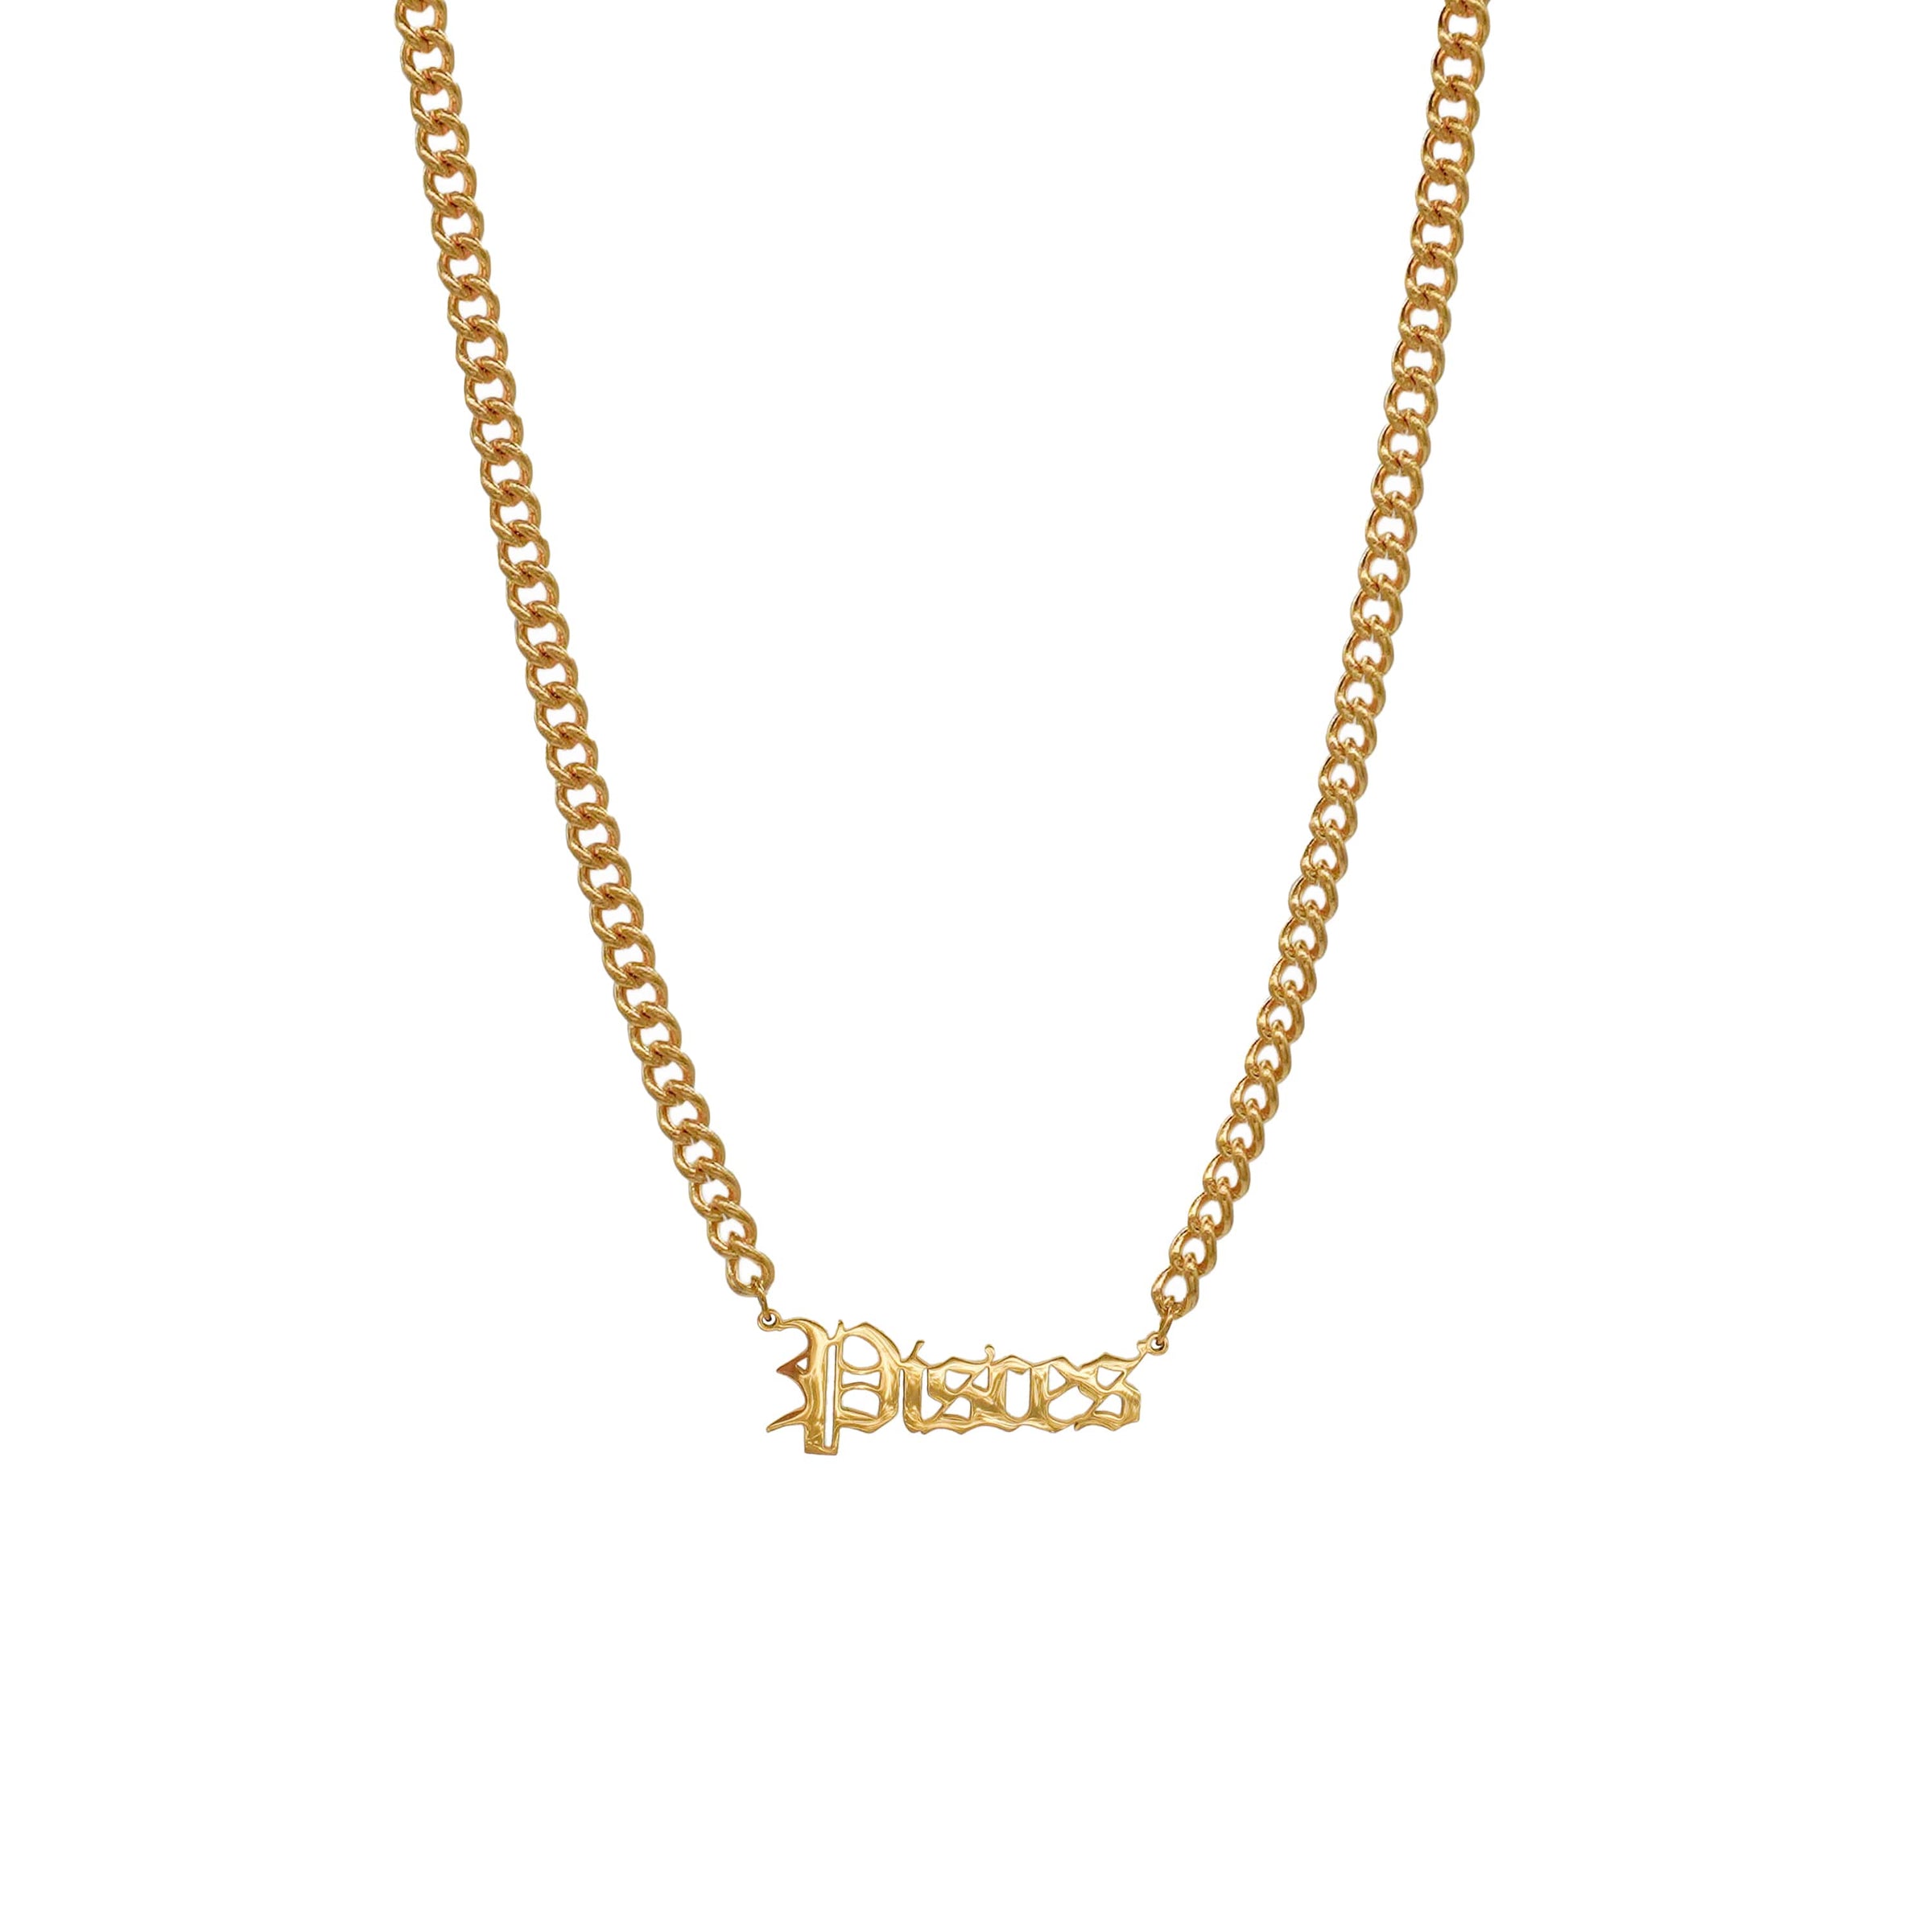 Starborn Patterns 18k Gold Plated Stainless Steel Zodiac Sign Astrology Cuban Chain Link Necklace Choker with Pisces Old English Font Charm